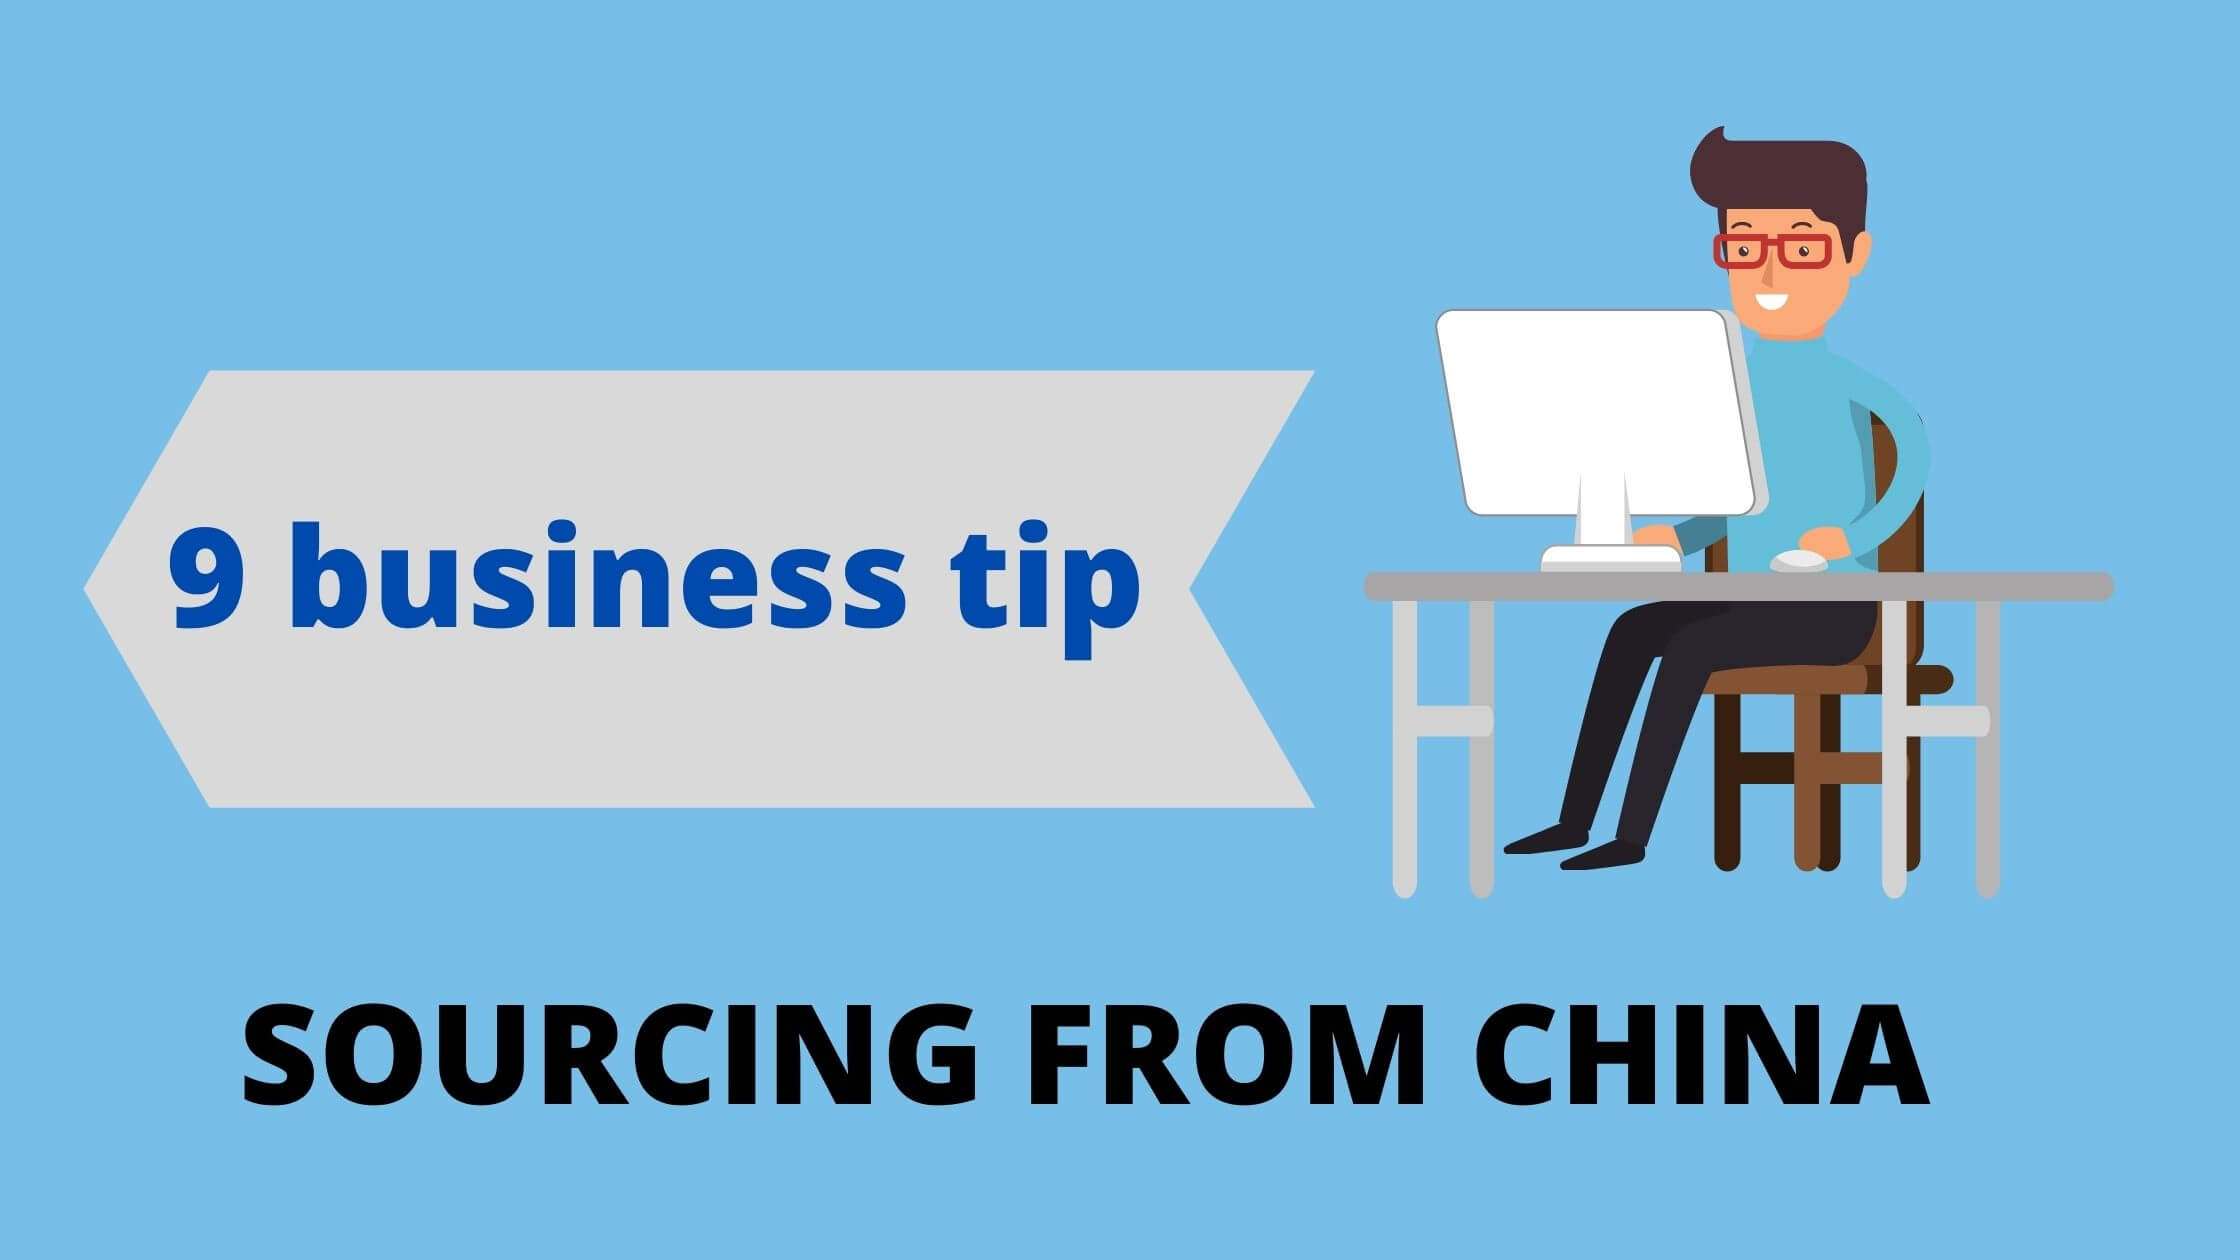 9 business tip SOURCING FROM CHINA